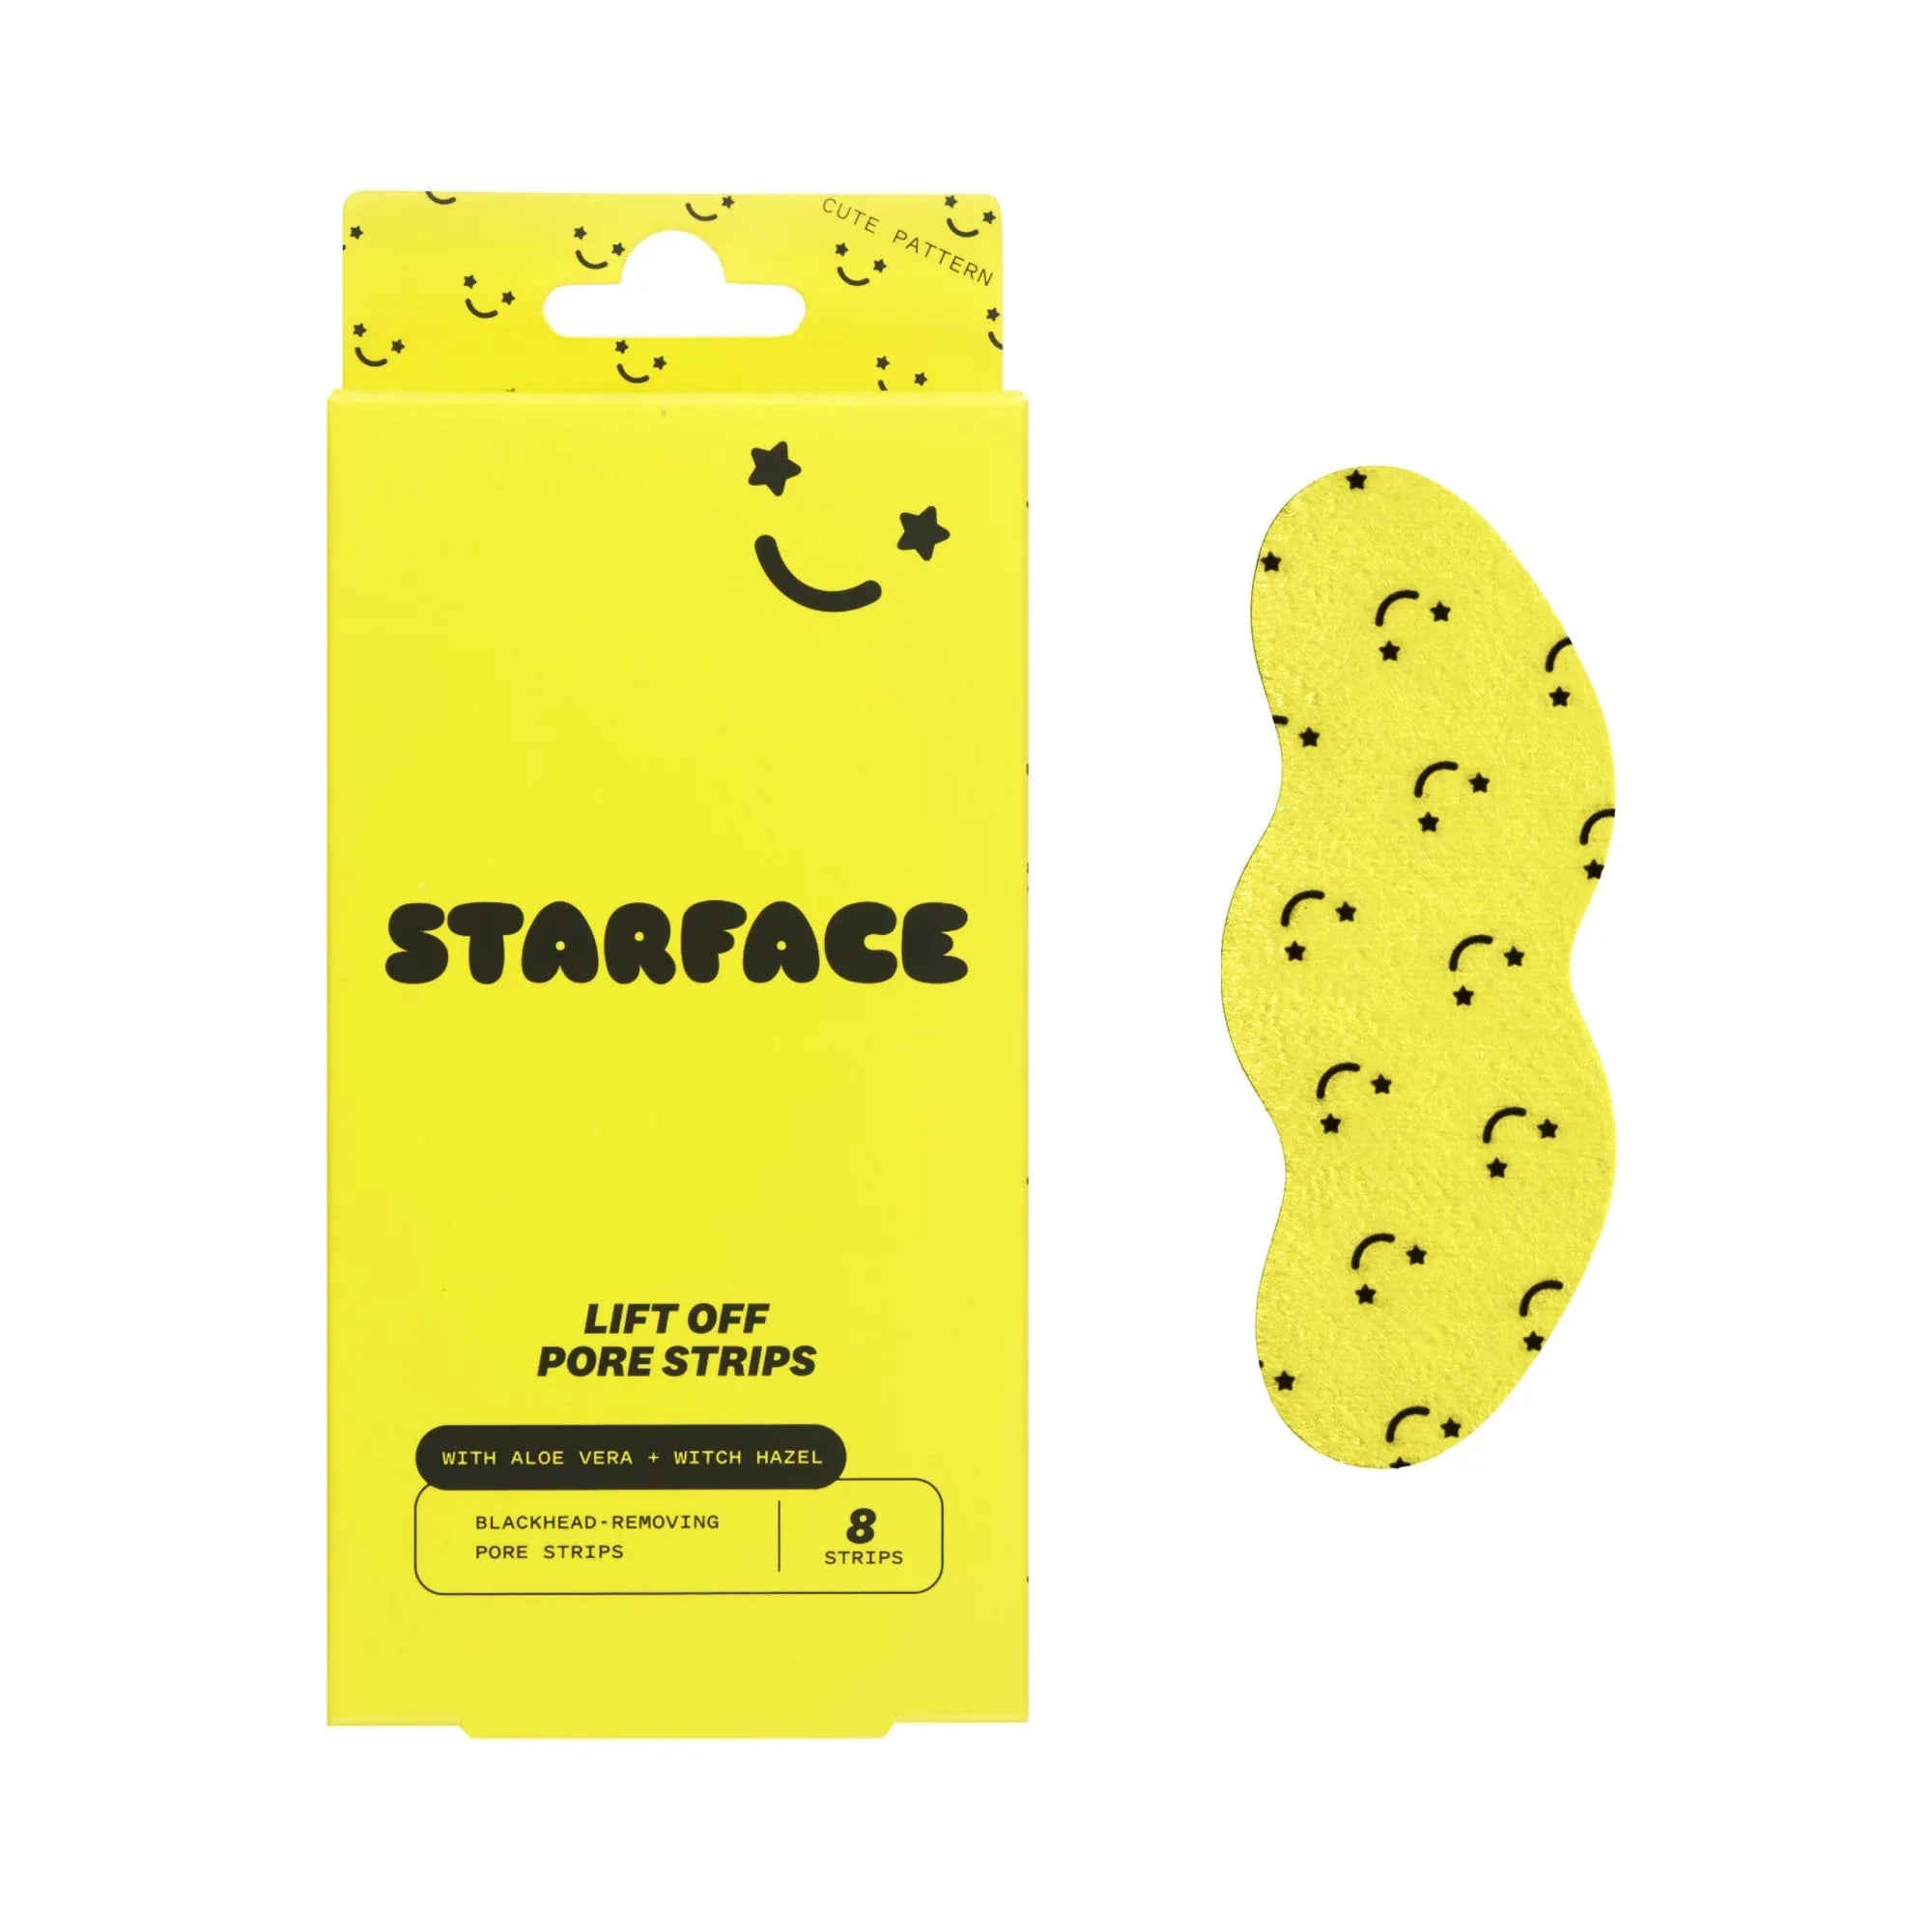 Wholesale prices with free shipping all over United States Starface Lift Off Blackhead Removing Pore Strips 8 Count - Steven Deals